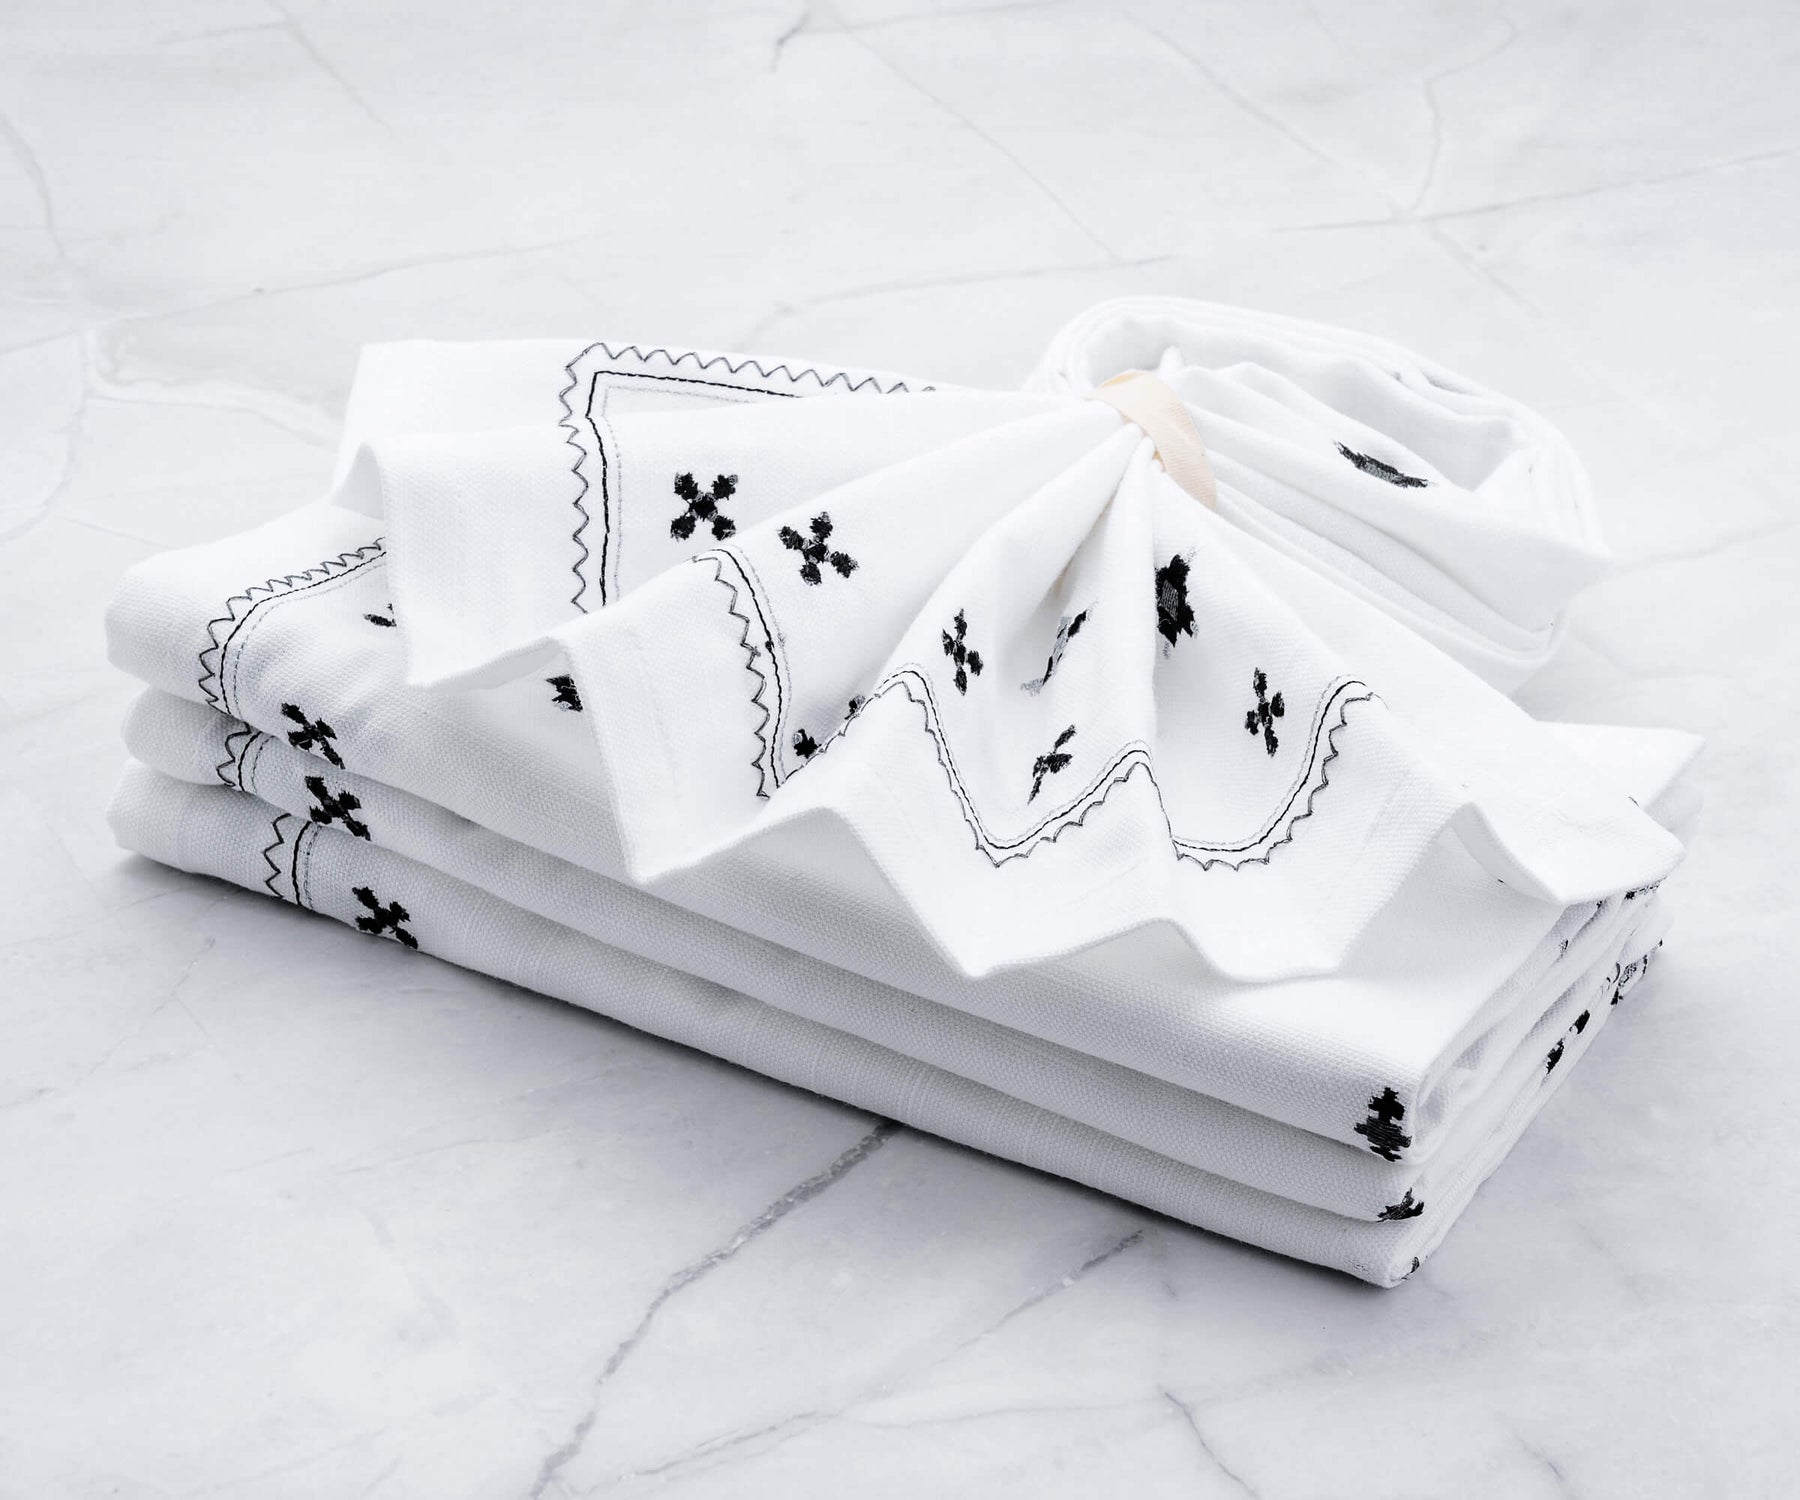 white dinner napkins come in different sizes, including standard sizes for everyday use and larger sizes for formal occasions.